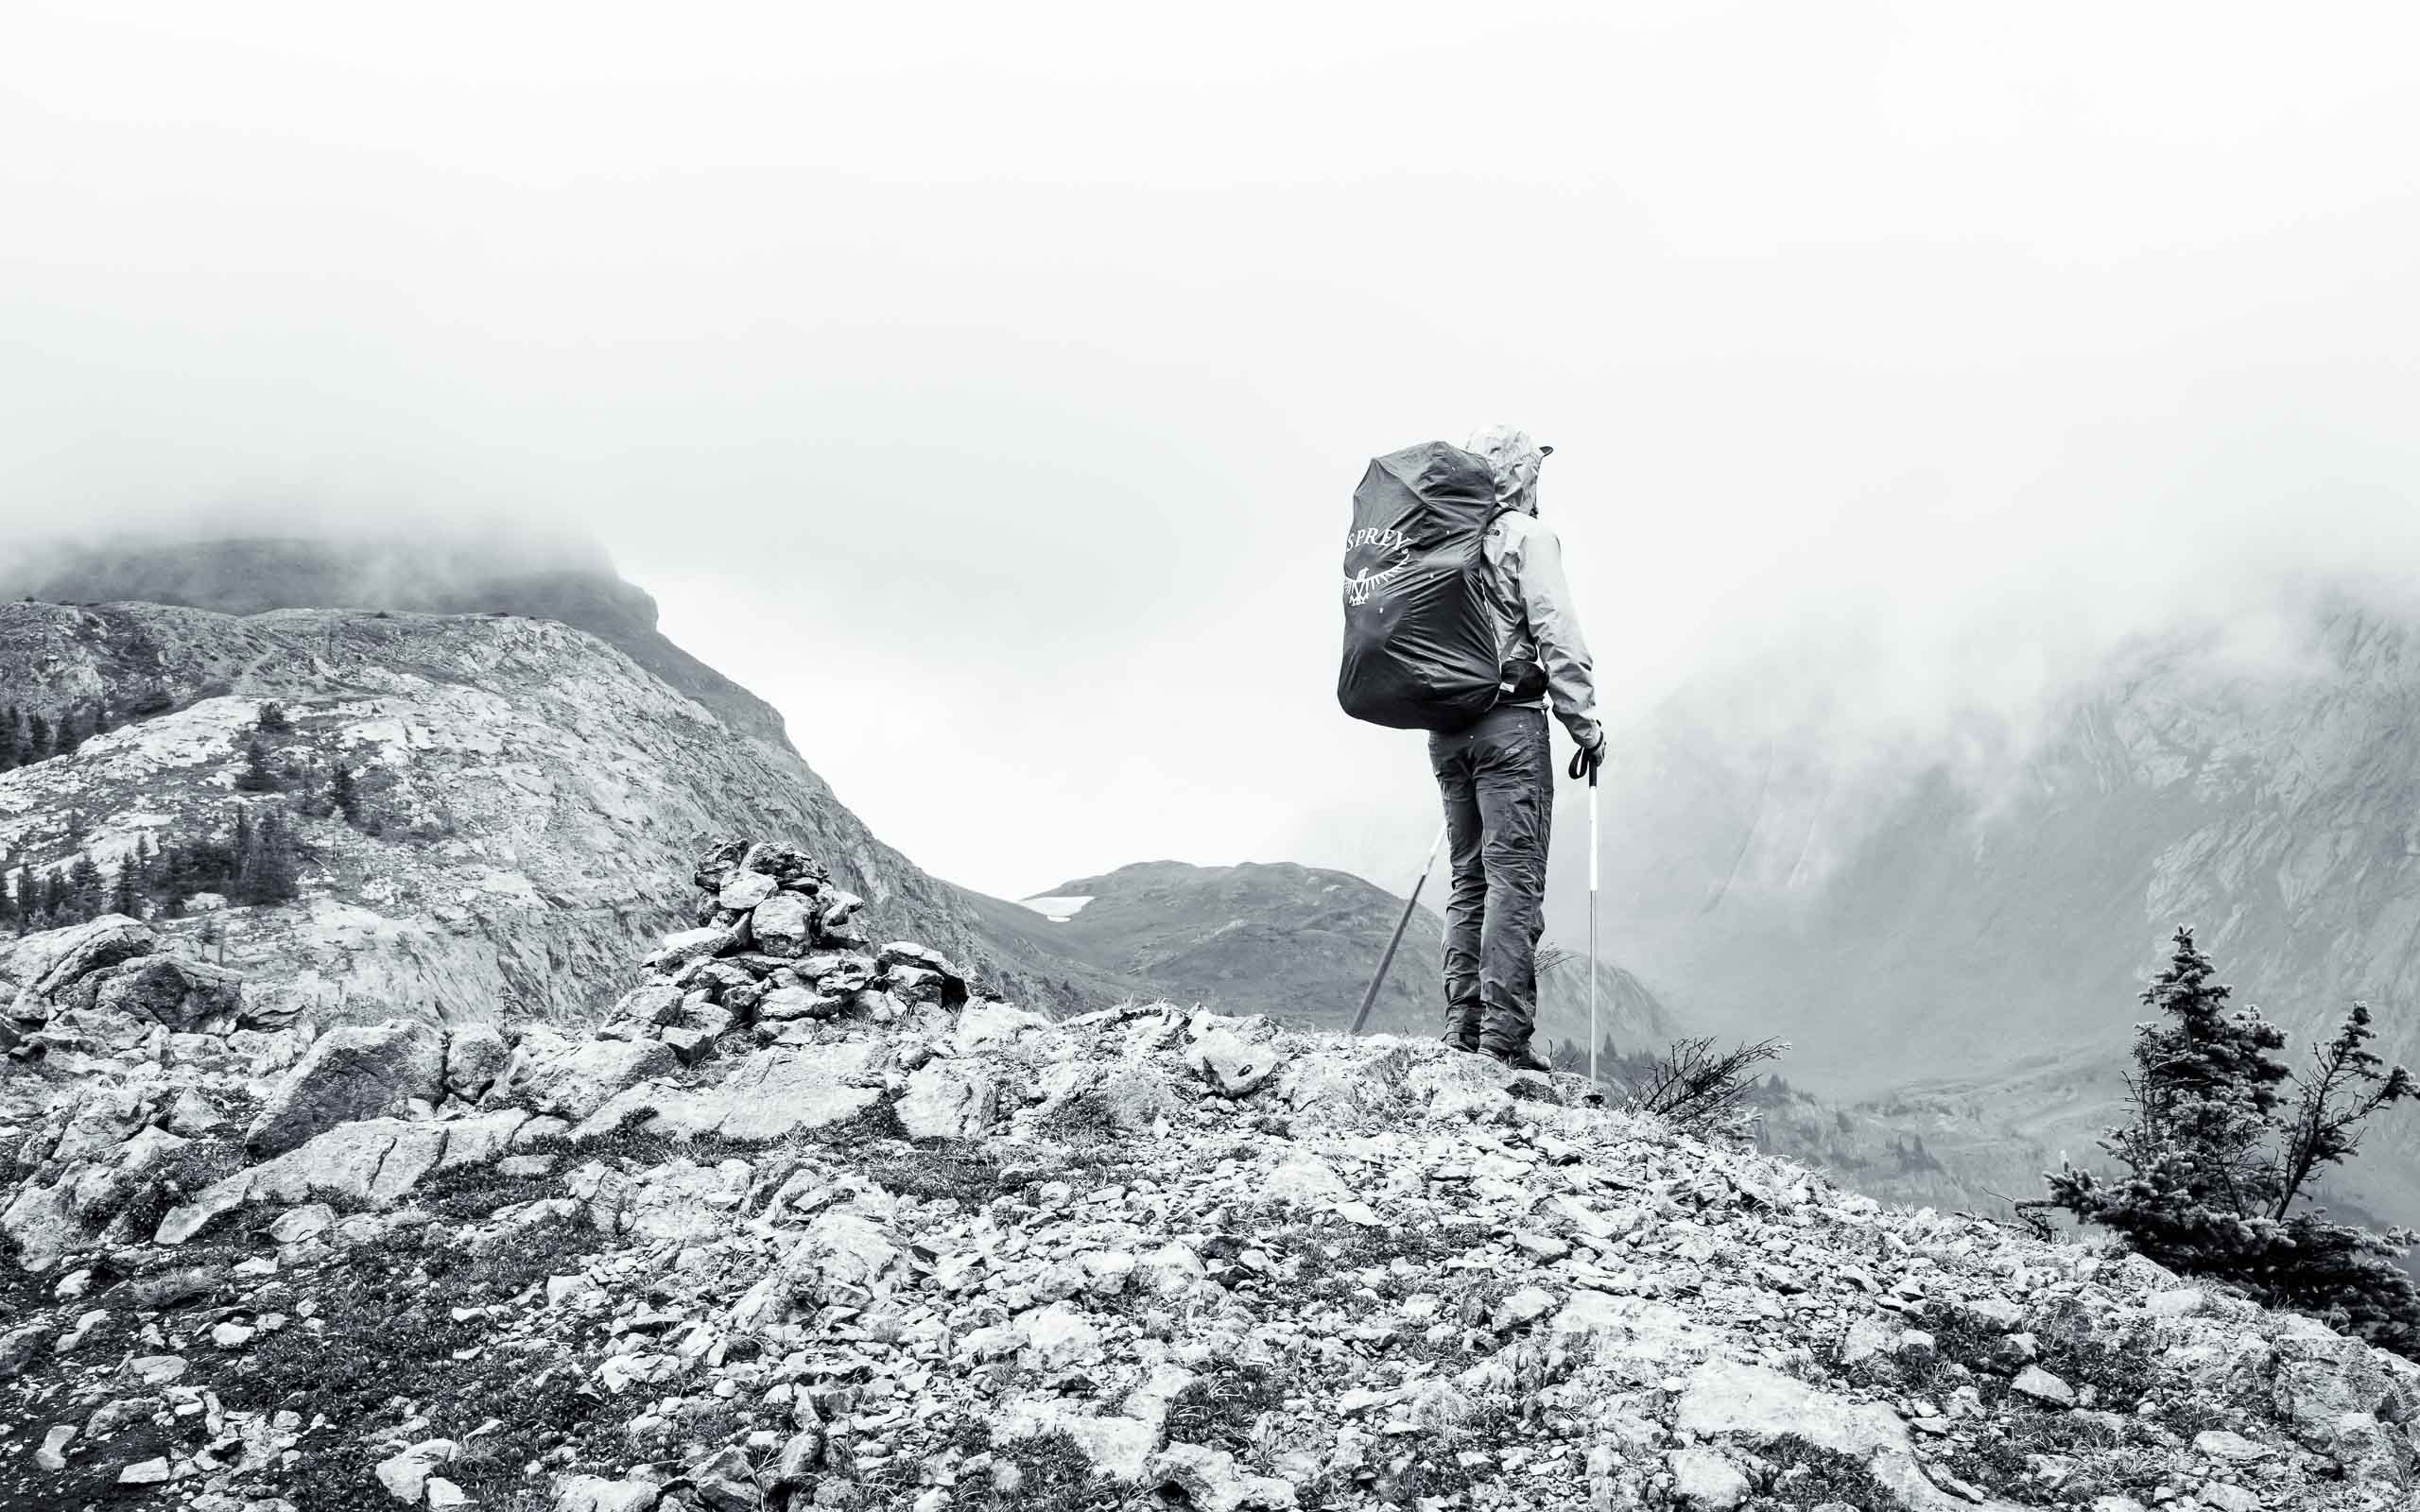 Marketing Image Content. Branding photography featuring a man wearing an Osprey backpack on a mountain top.